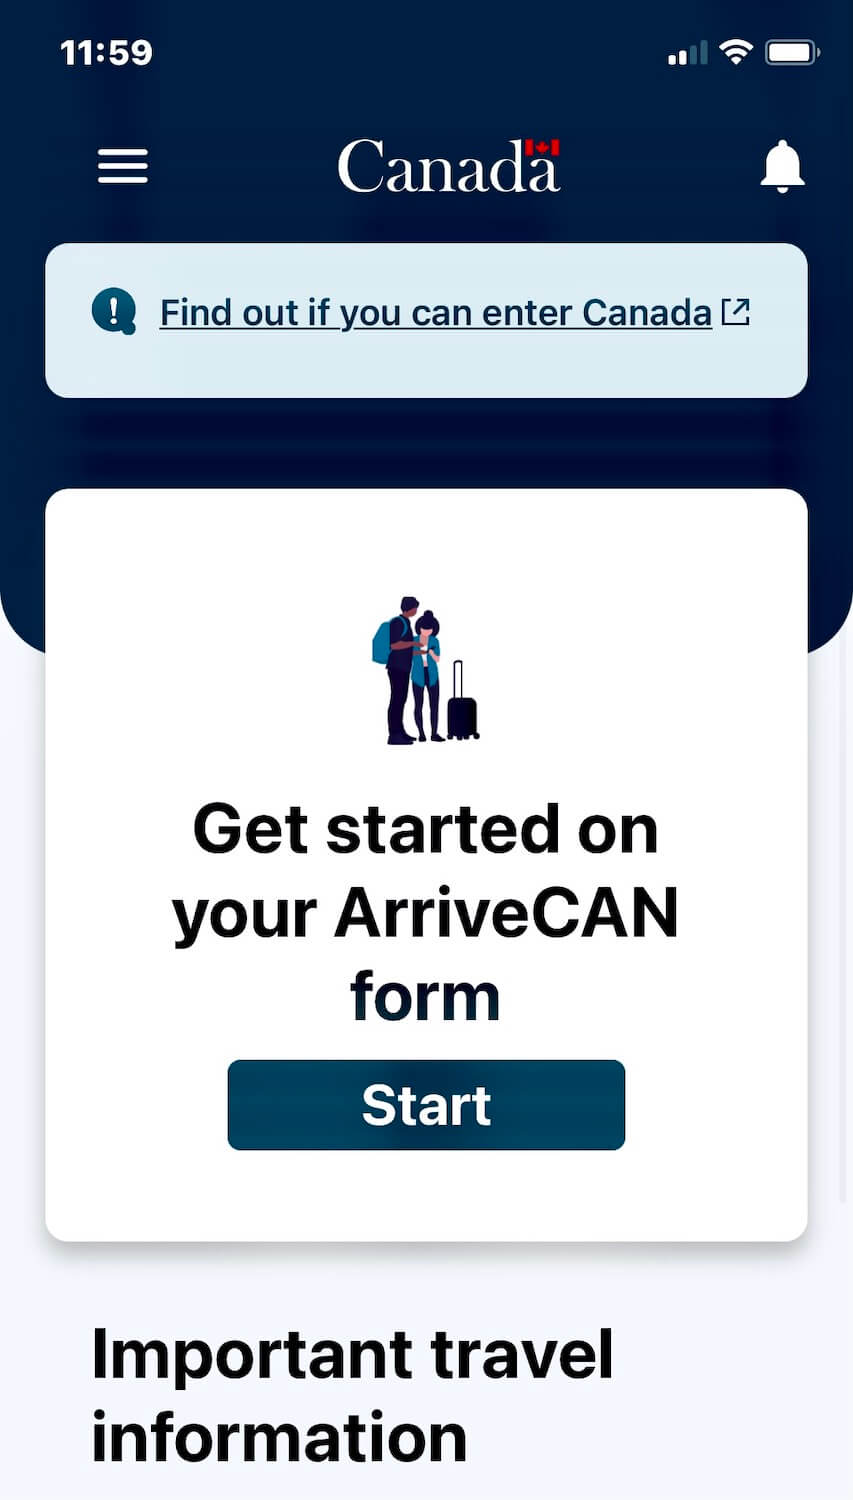 The ArriveCAN app helps travelers navigate crossing the United States Canada border during the time of COVID with extra documentation requirements.